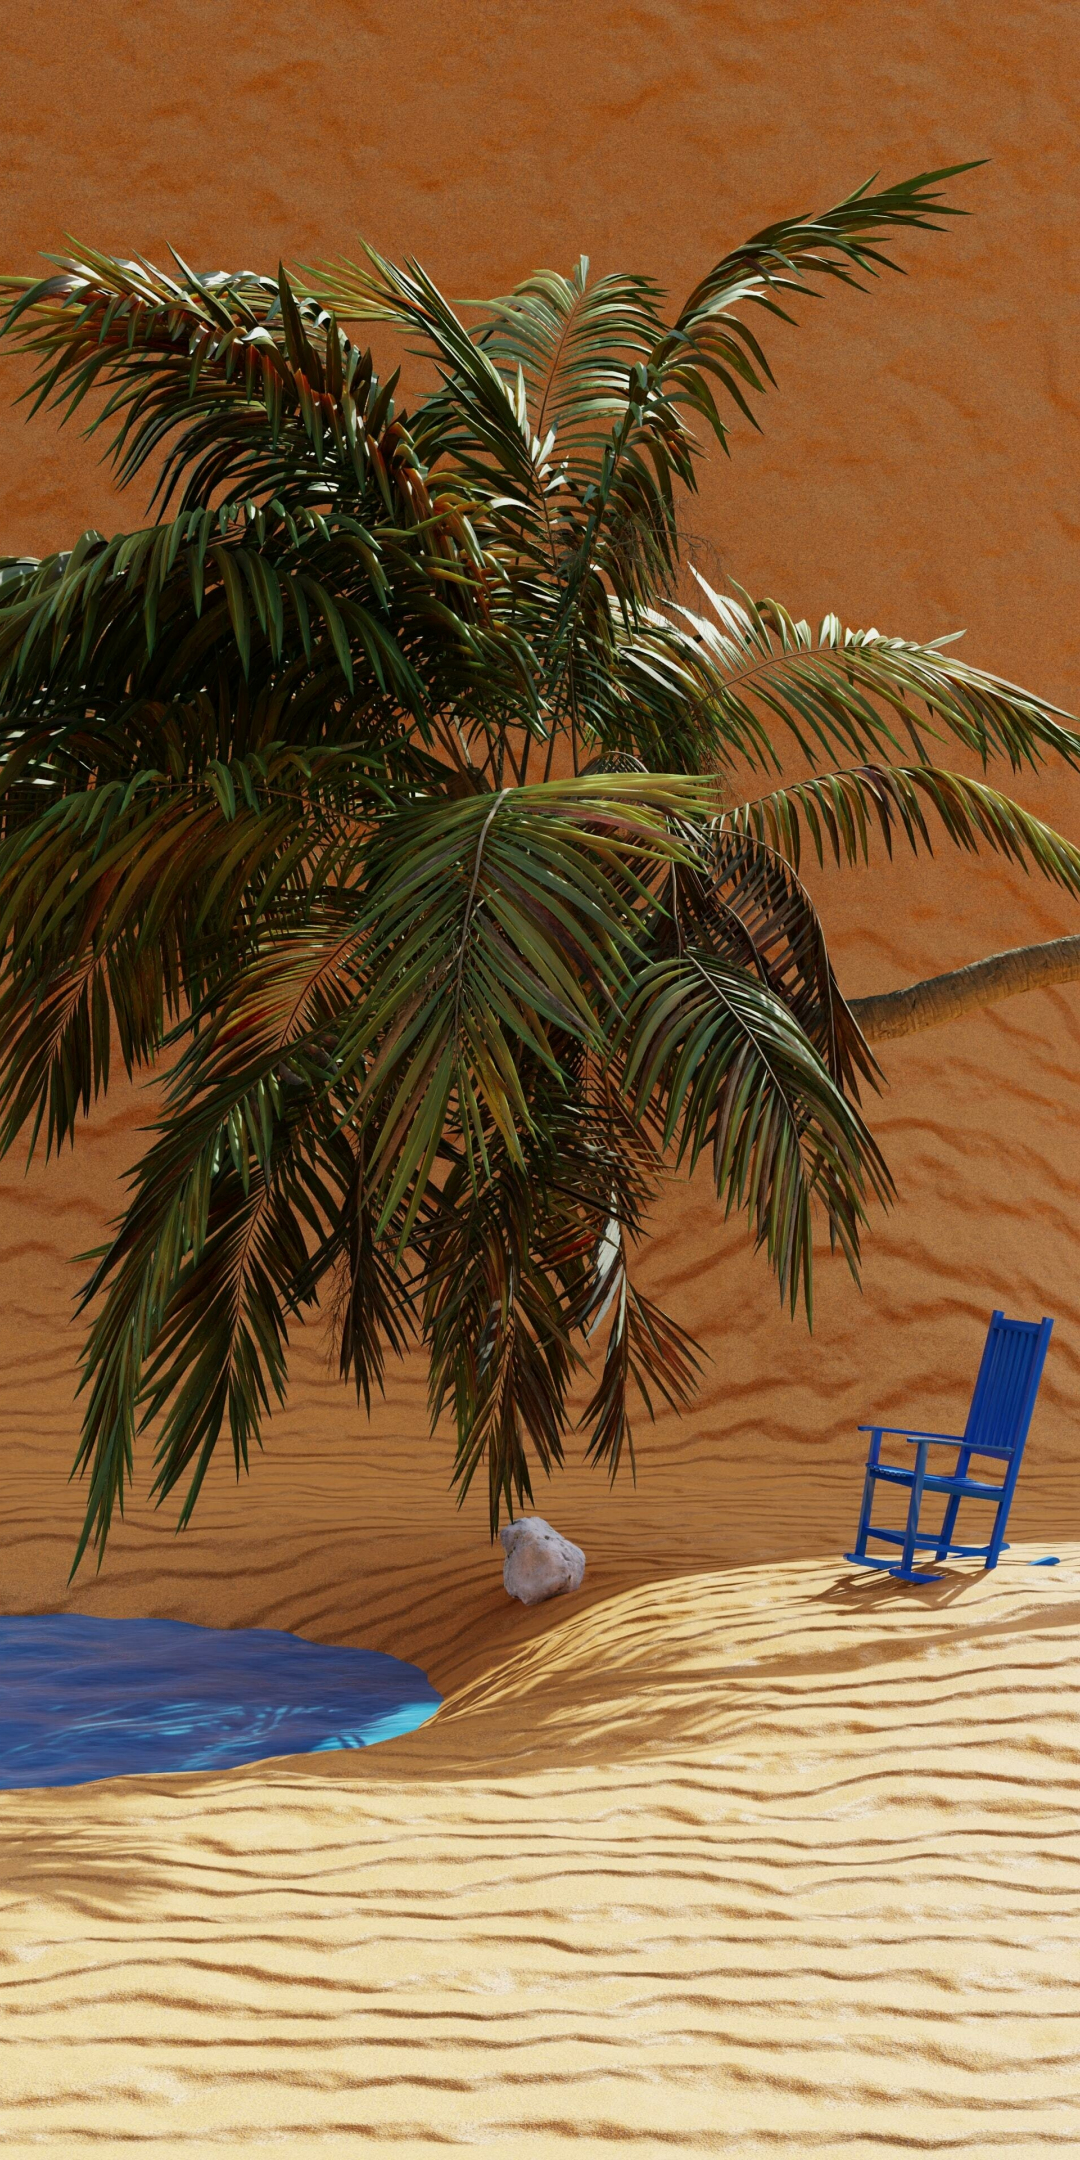 Palm tree and desert, vacation, 1080x2160 wallpaper